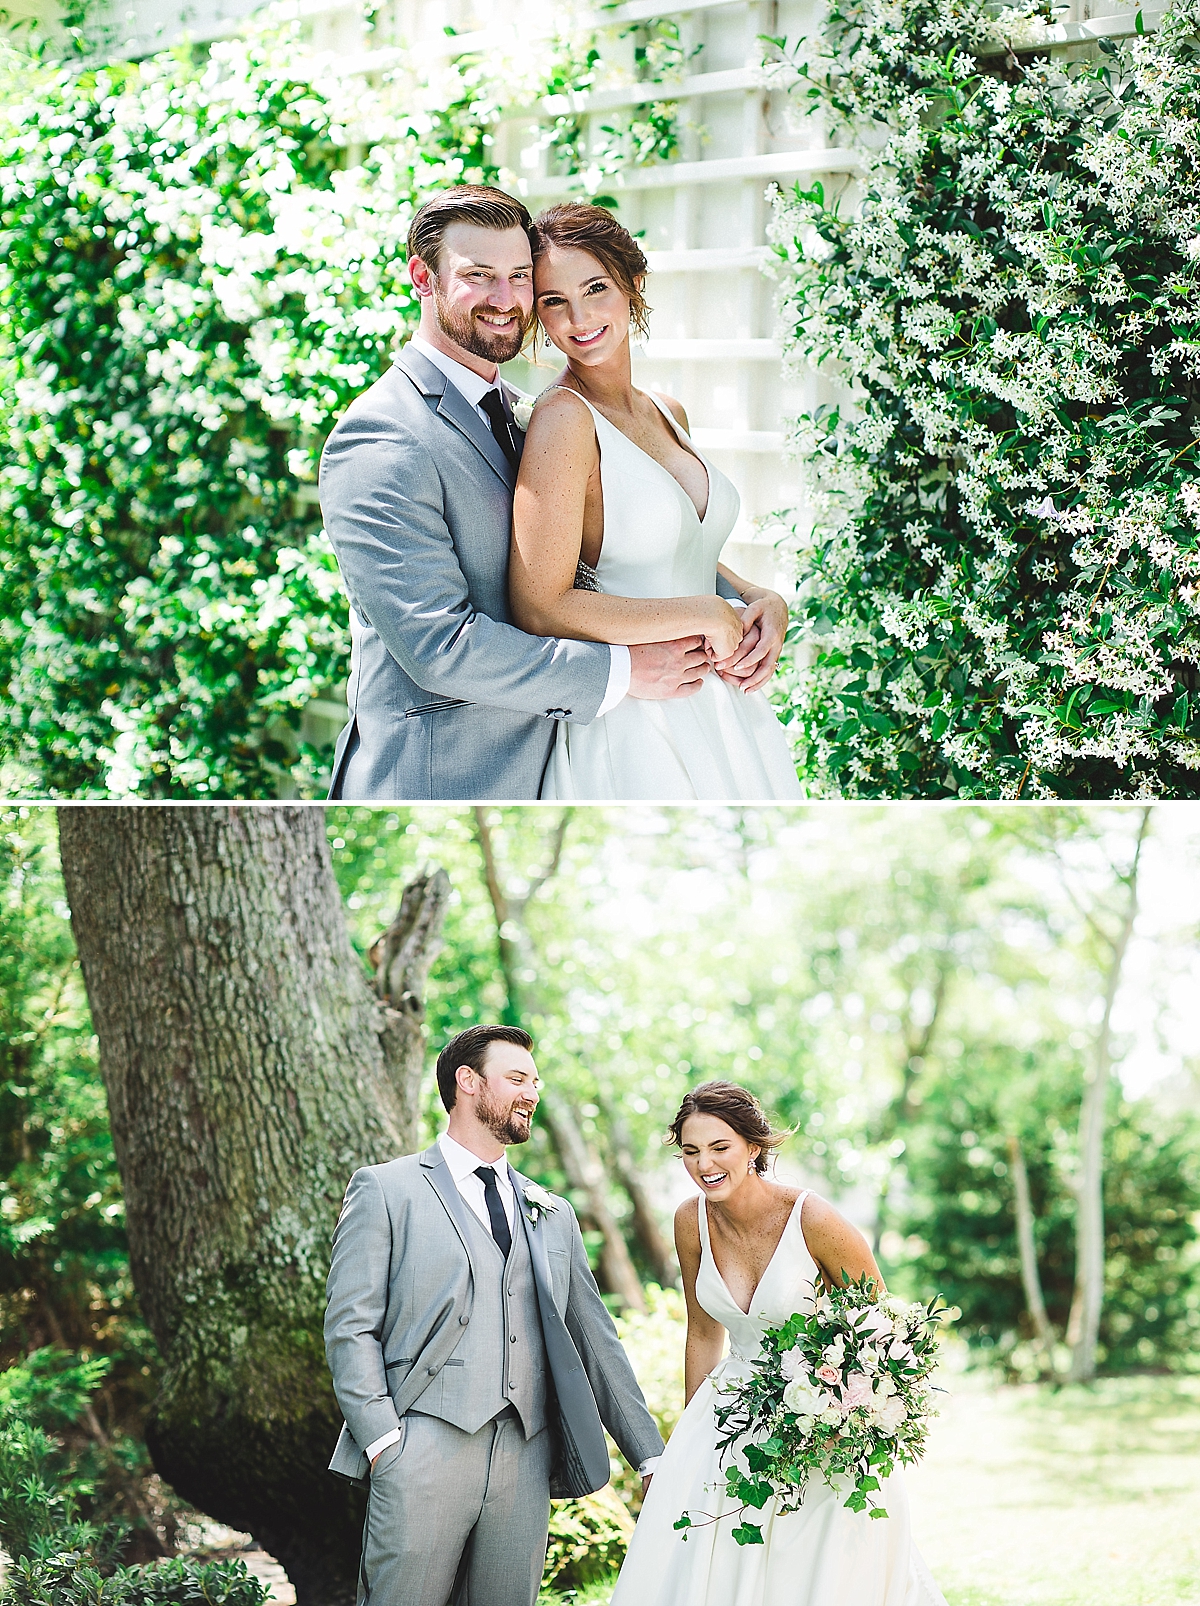 Maggie and Wesley’s Tybee Island Wedding Chapel Wedding by Izzy Hudgins Photography, Flowers by Kato Floral Designs